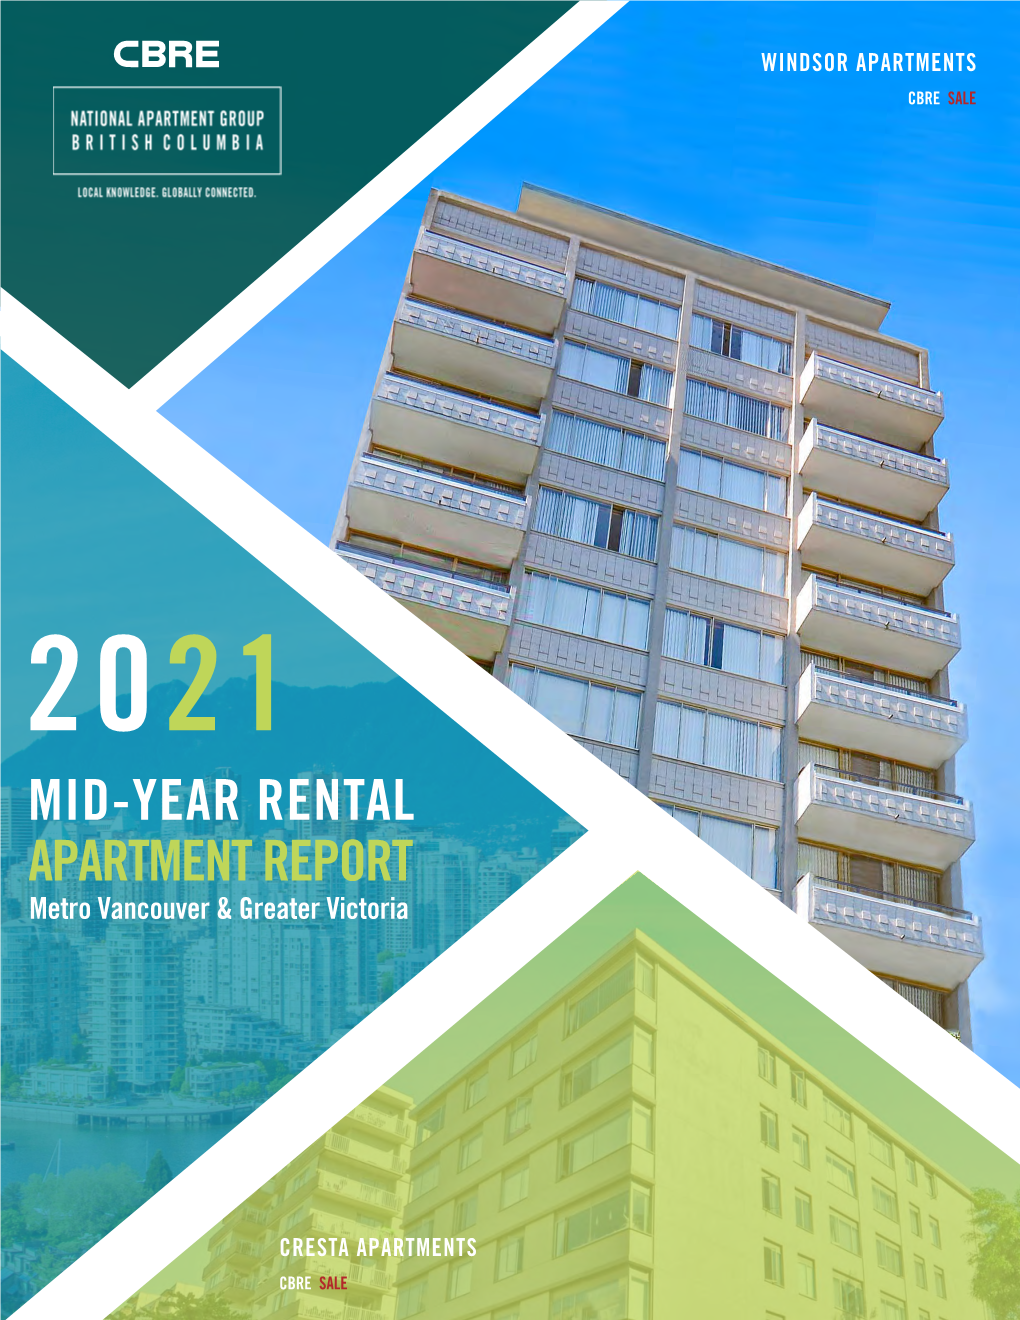 MID-YEAR RENTAL APARTMENT REPORT Metro Vancouver & Greater Victoria